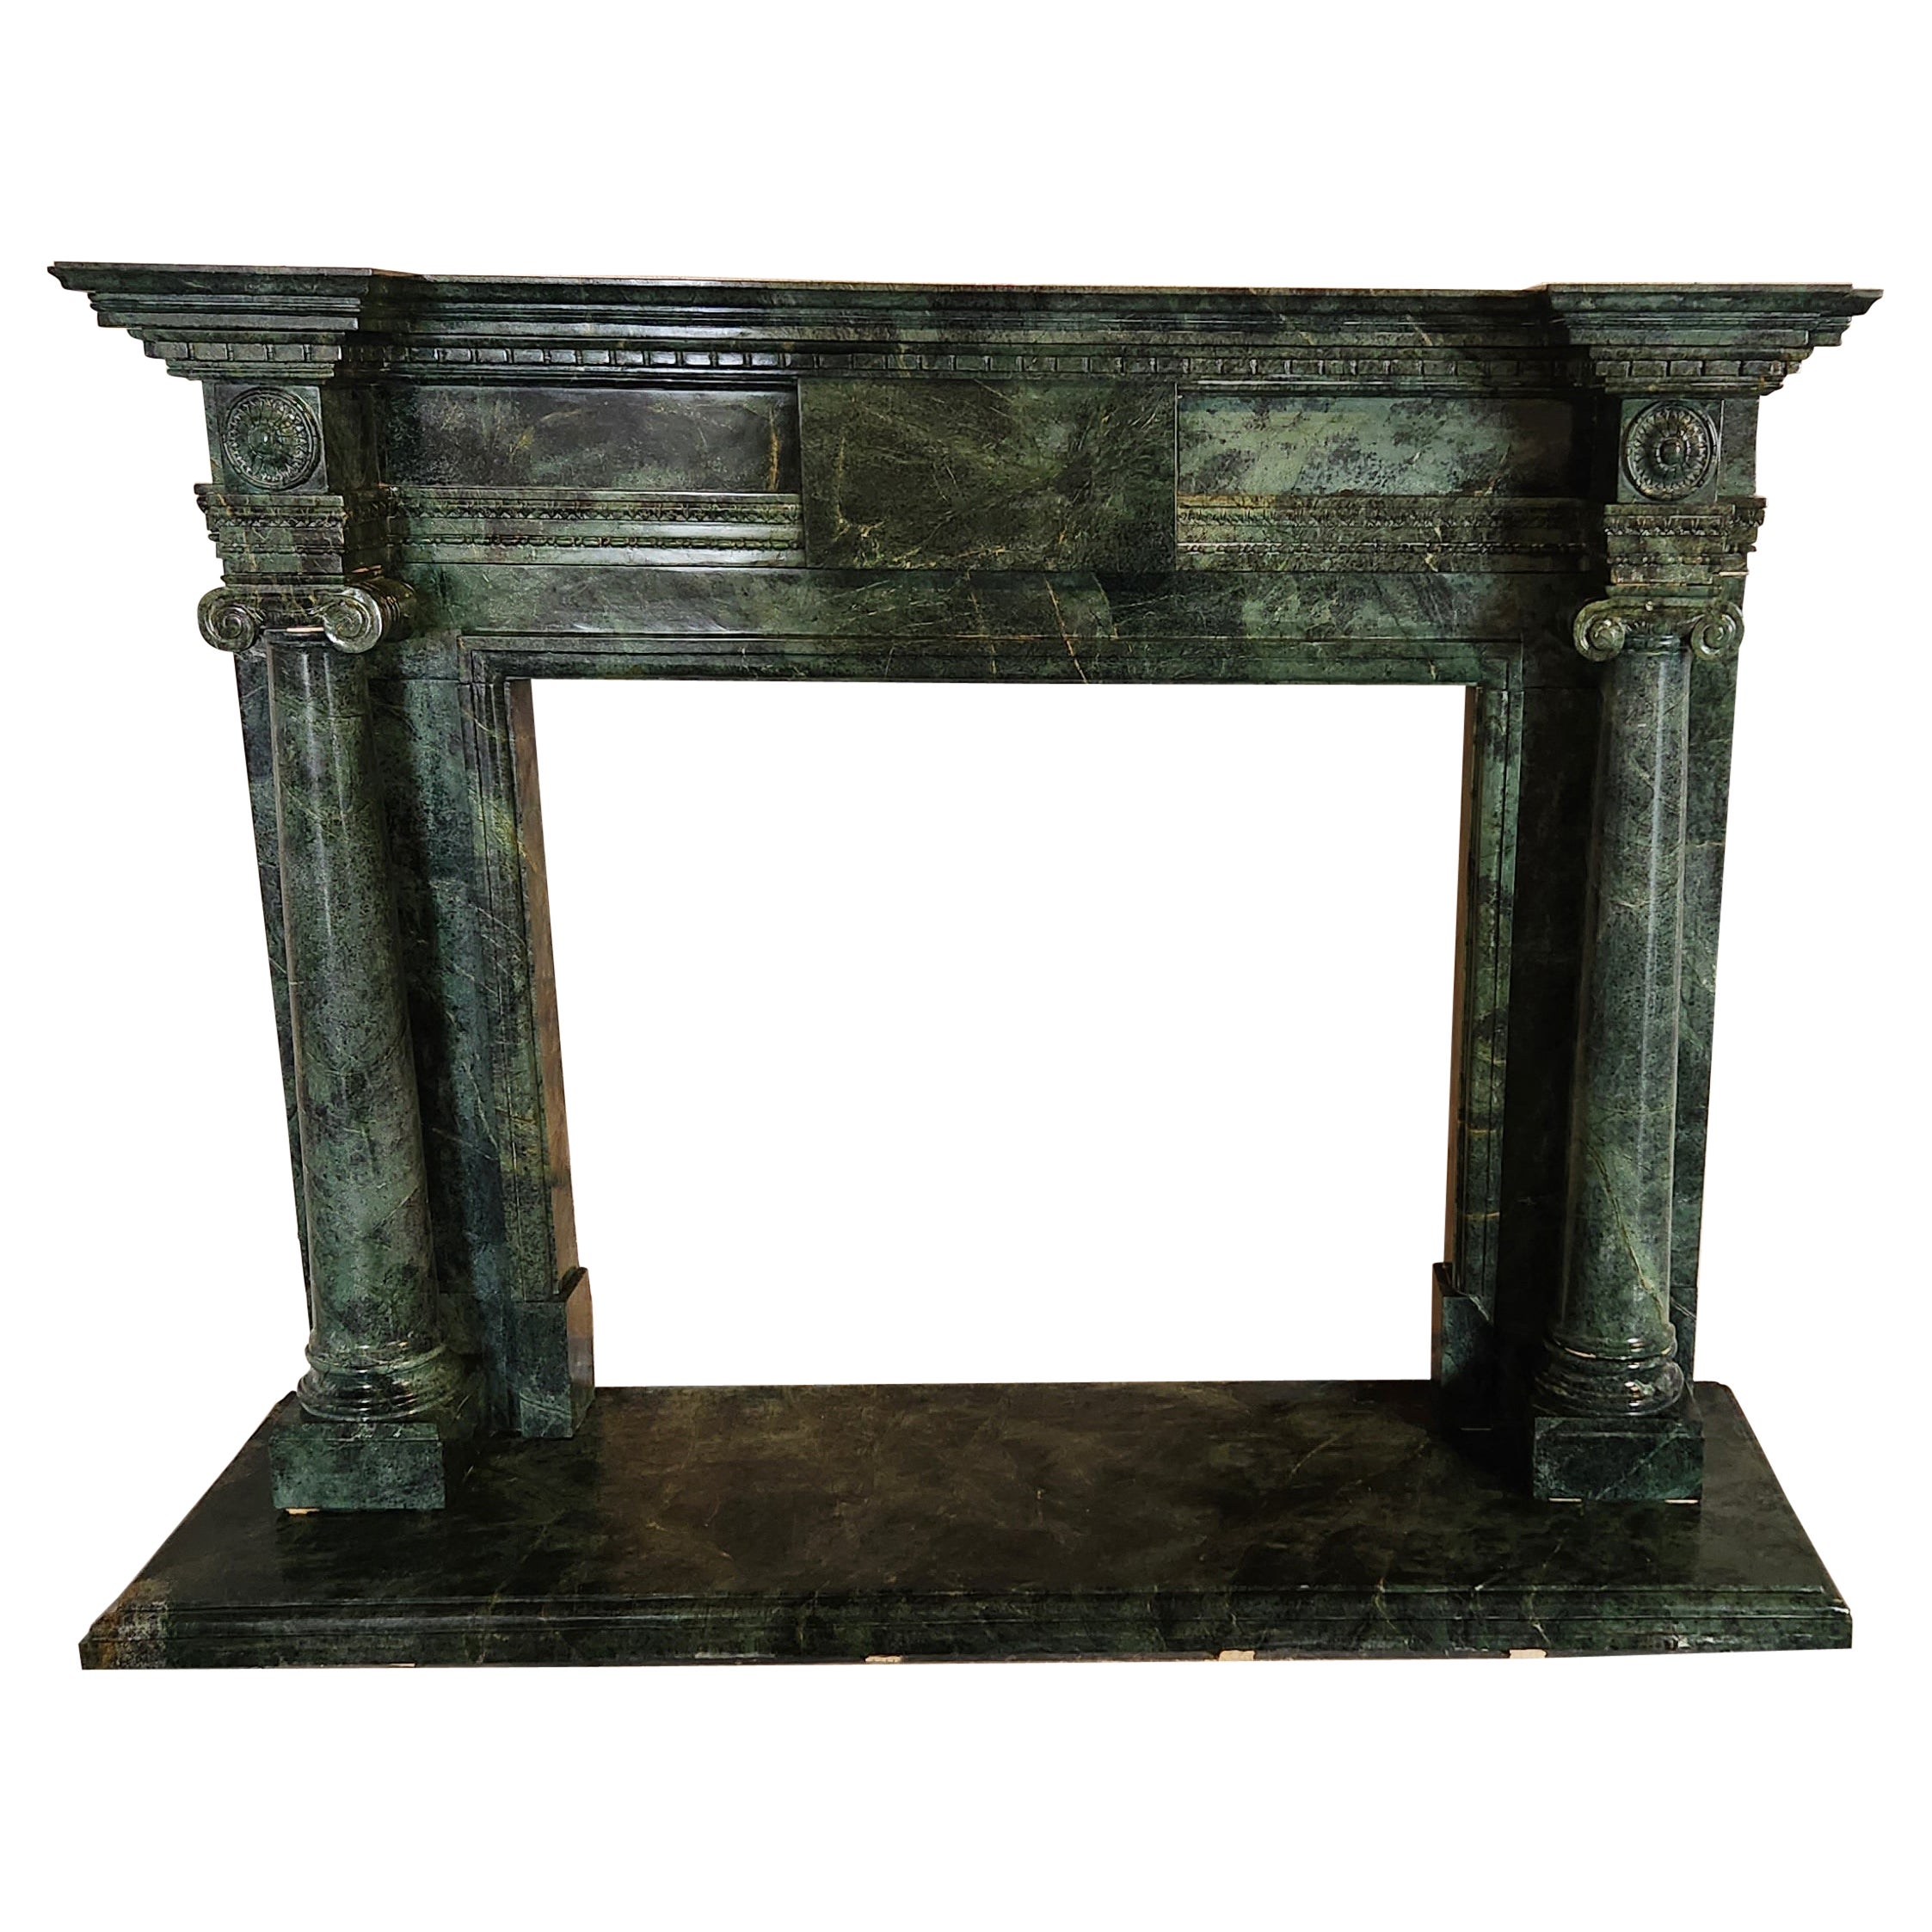 Hand-Carved Dark Green Marble Fireplace Mantel in the Georgian Style